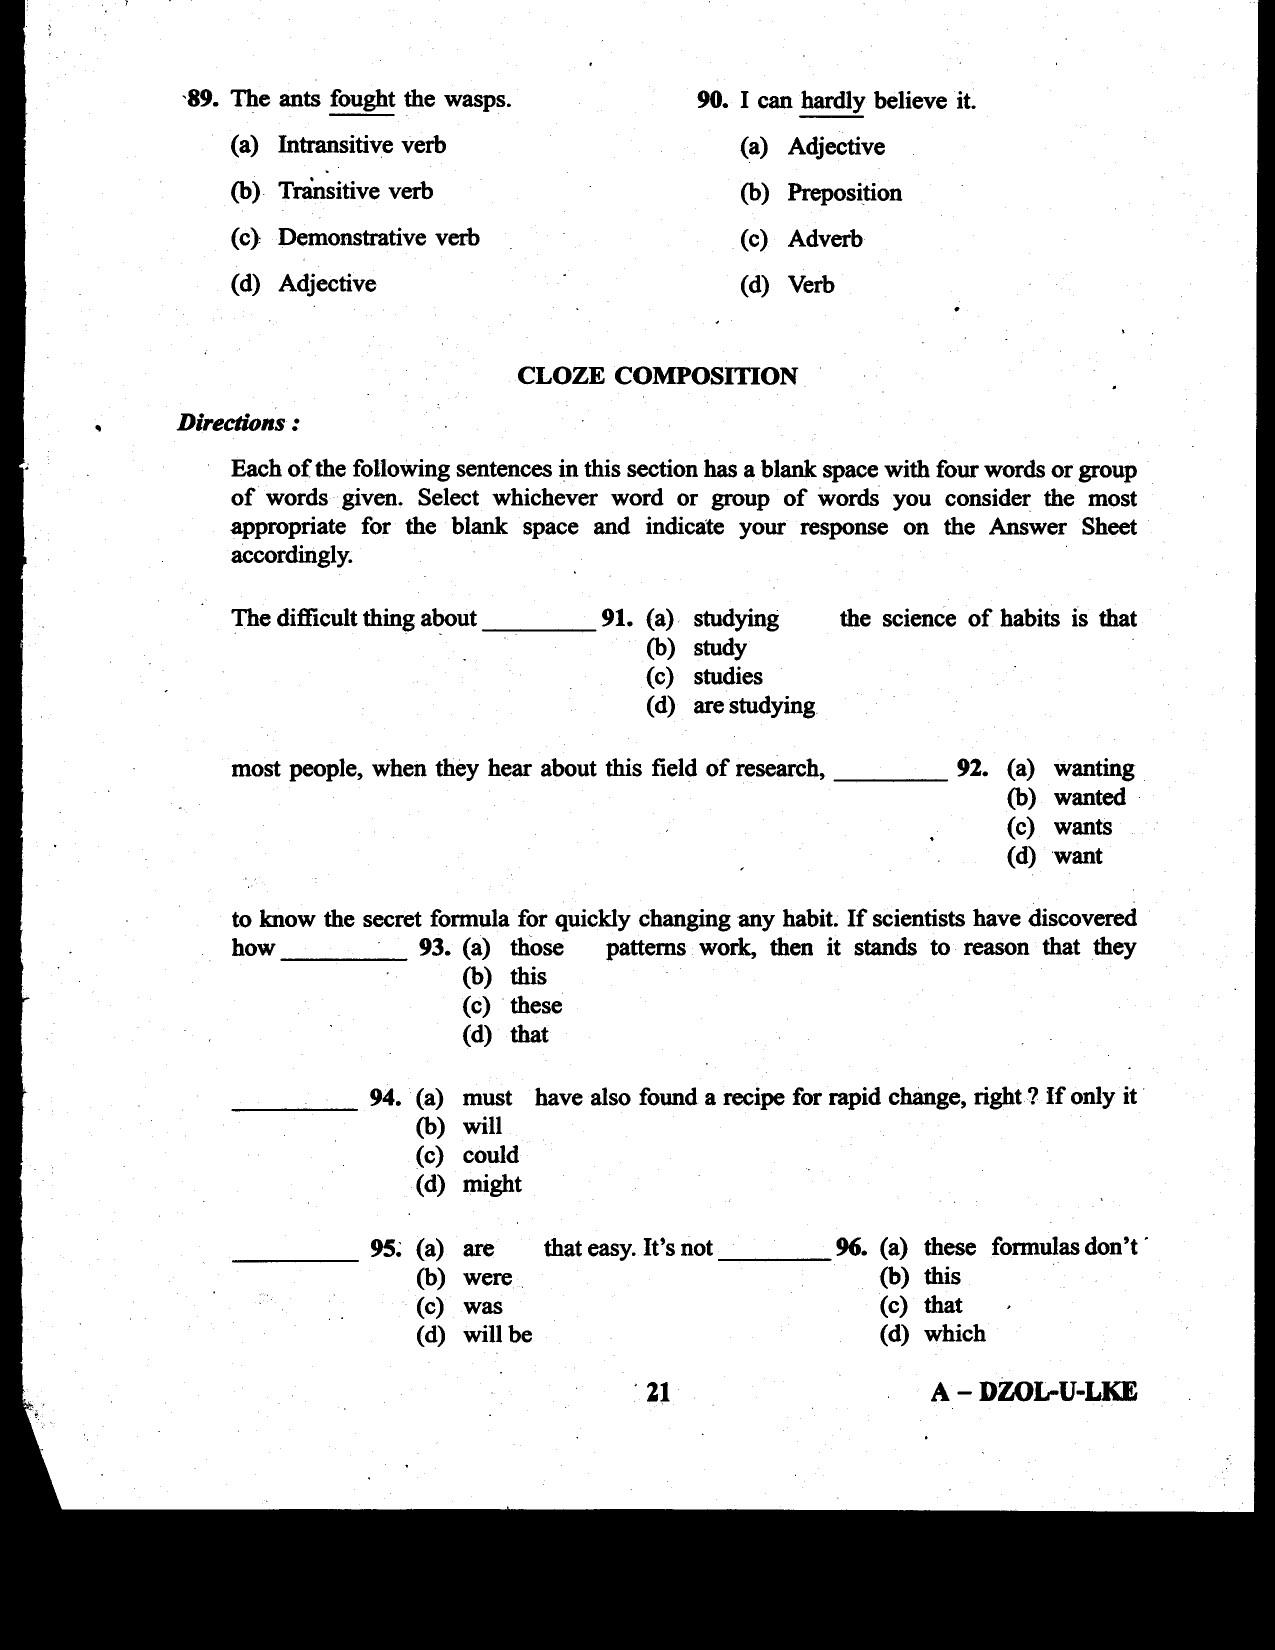 CDS II Examination 2020 English Question Paper - Image 21